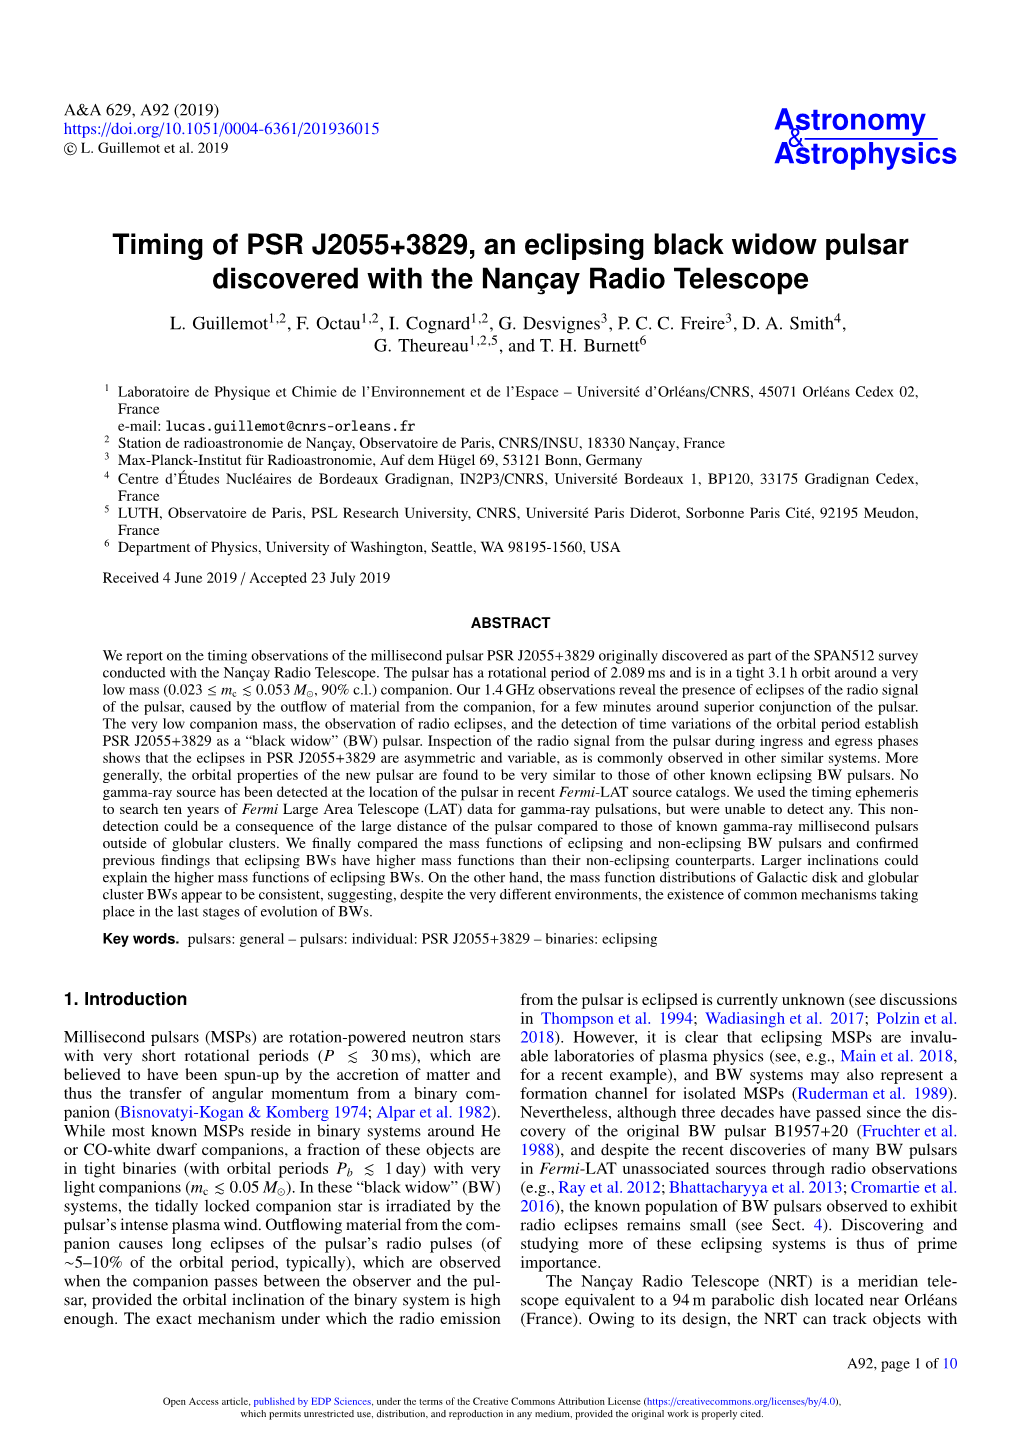 Timing of PSR J2055+3829, an Eclipsing Black Widow Pulsar Discovered with the Nançay Radio Telescope